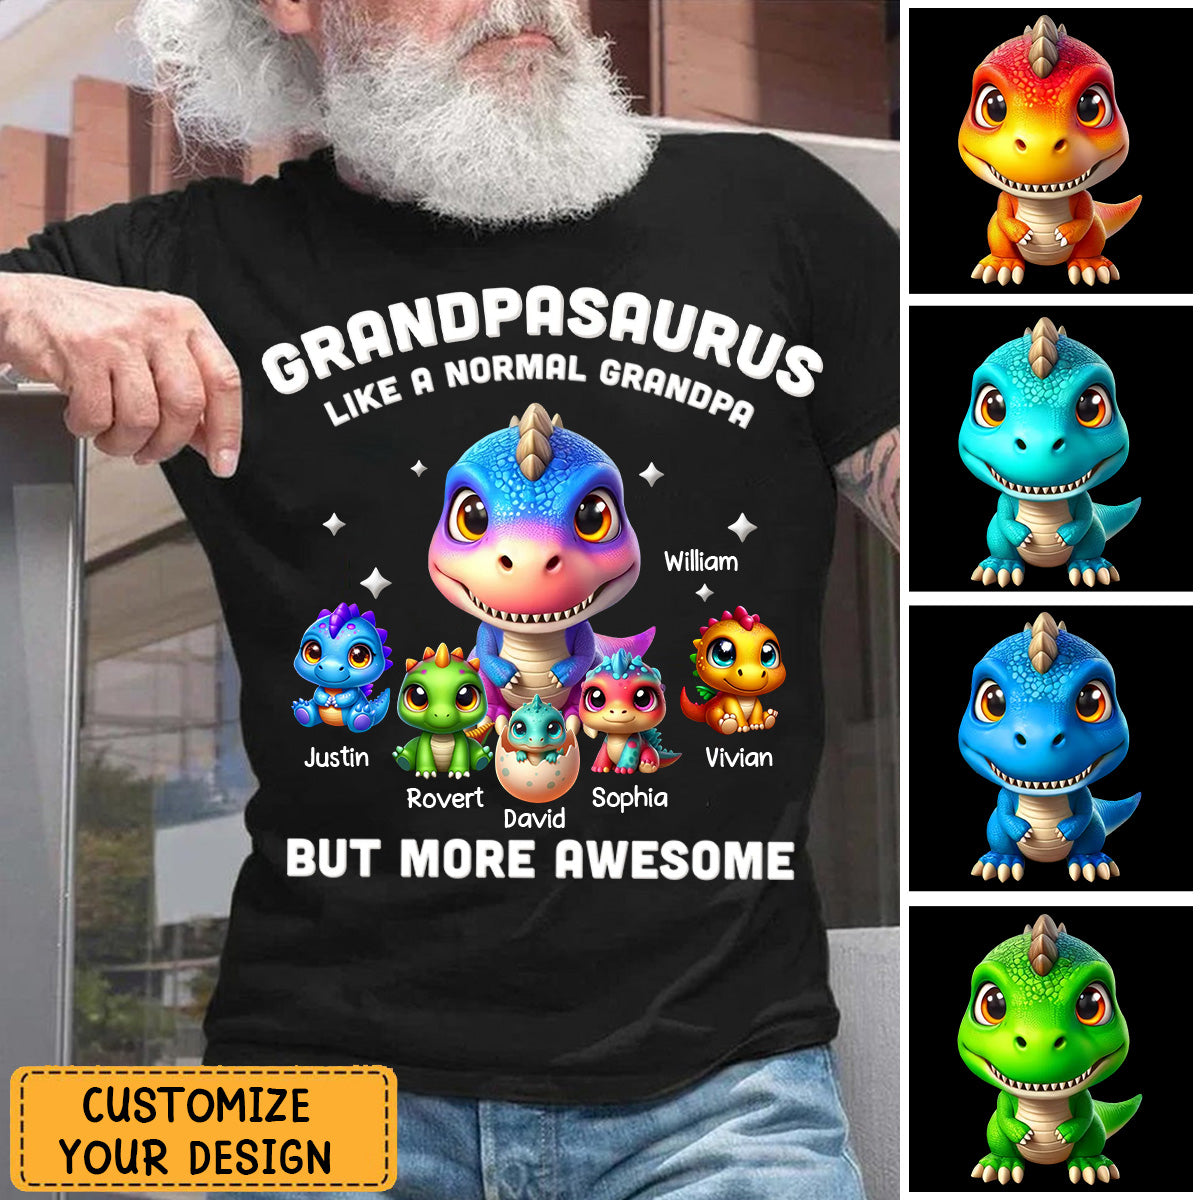 Daddysaurus Grandpasaurus 3D Dinosaurs Personalized Shirt, Father's Day Gift